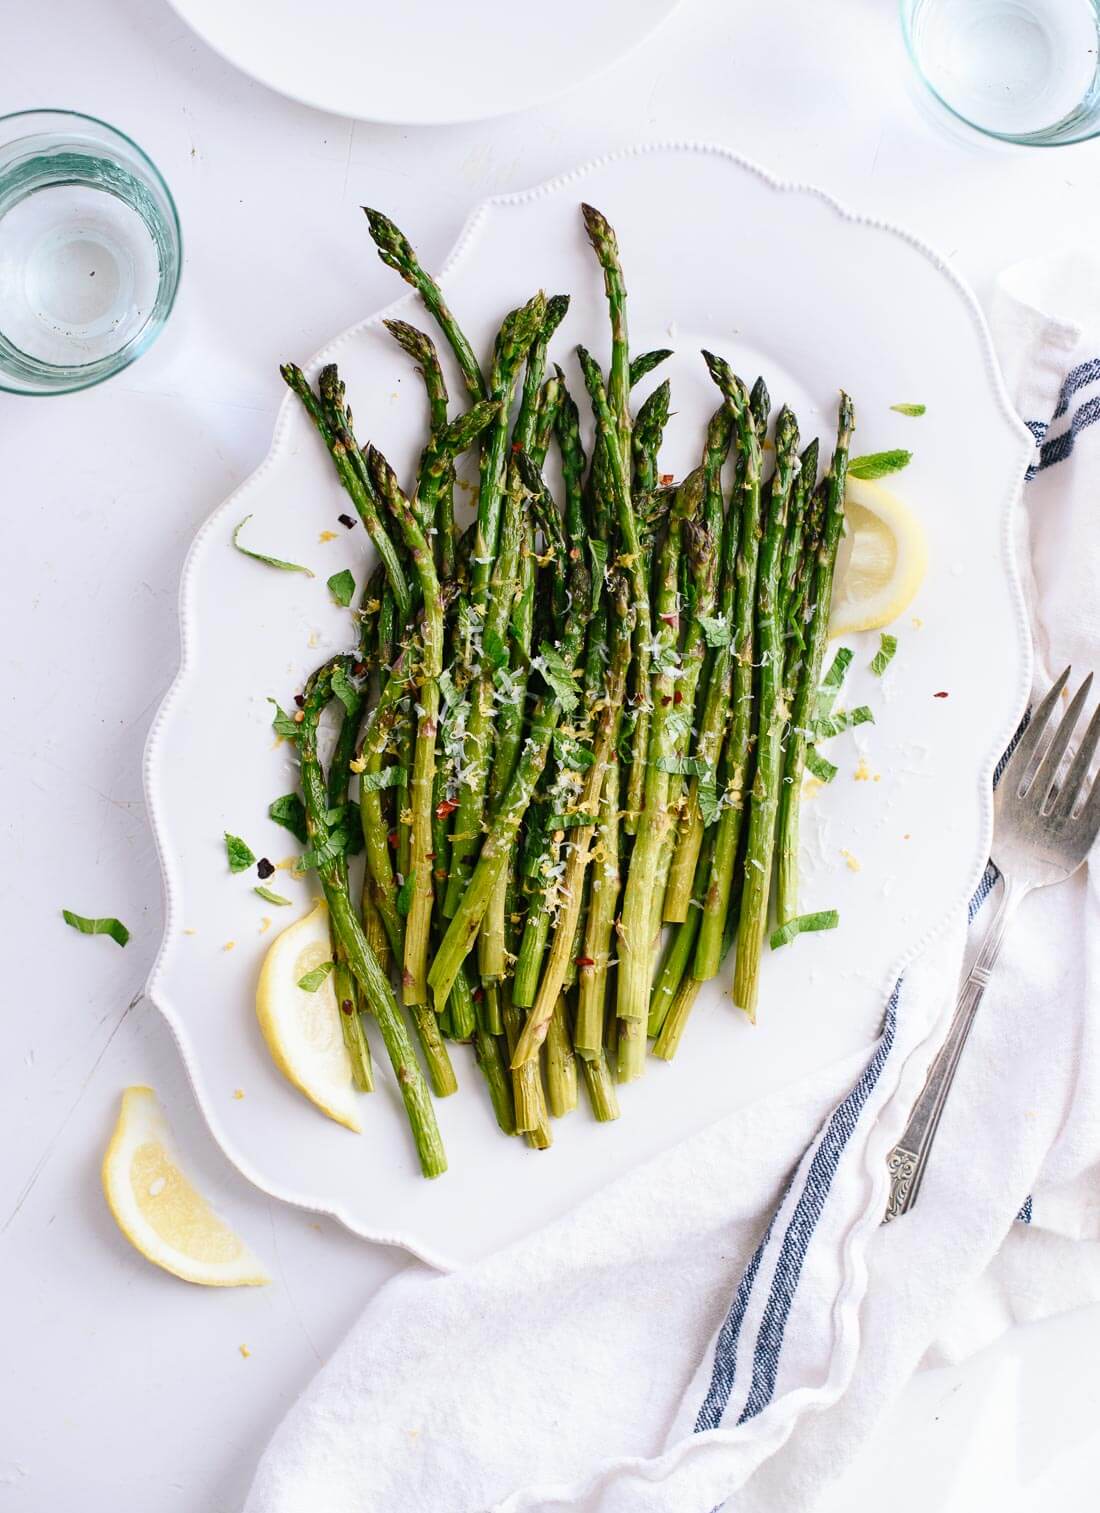 Simple roasted asparagus recipe (the perfect spring side